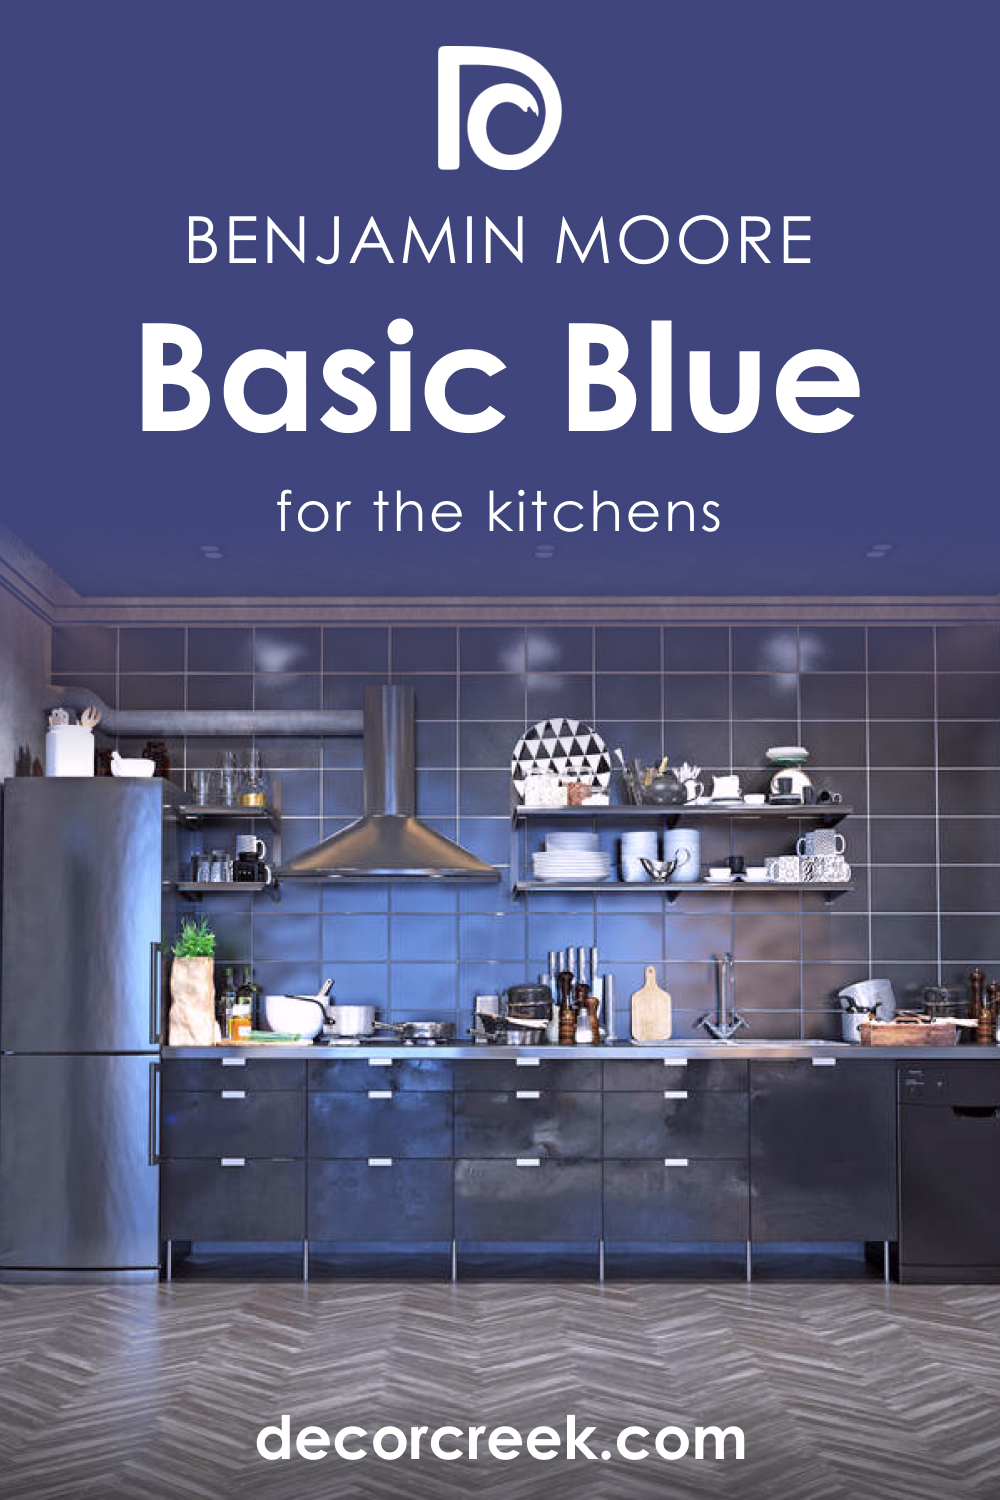 How to Use Basic Blue CC-968 in the Kitchen?